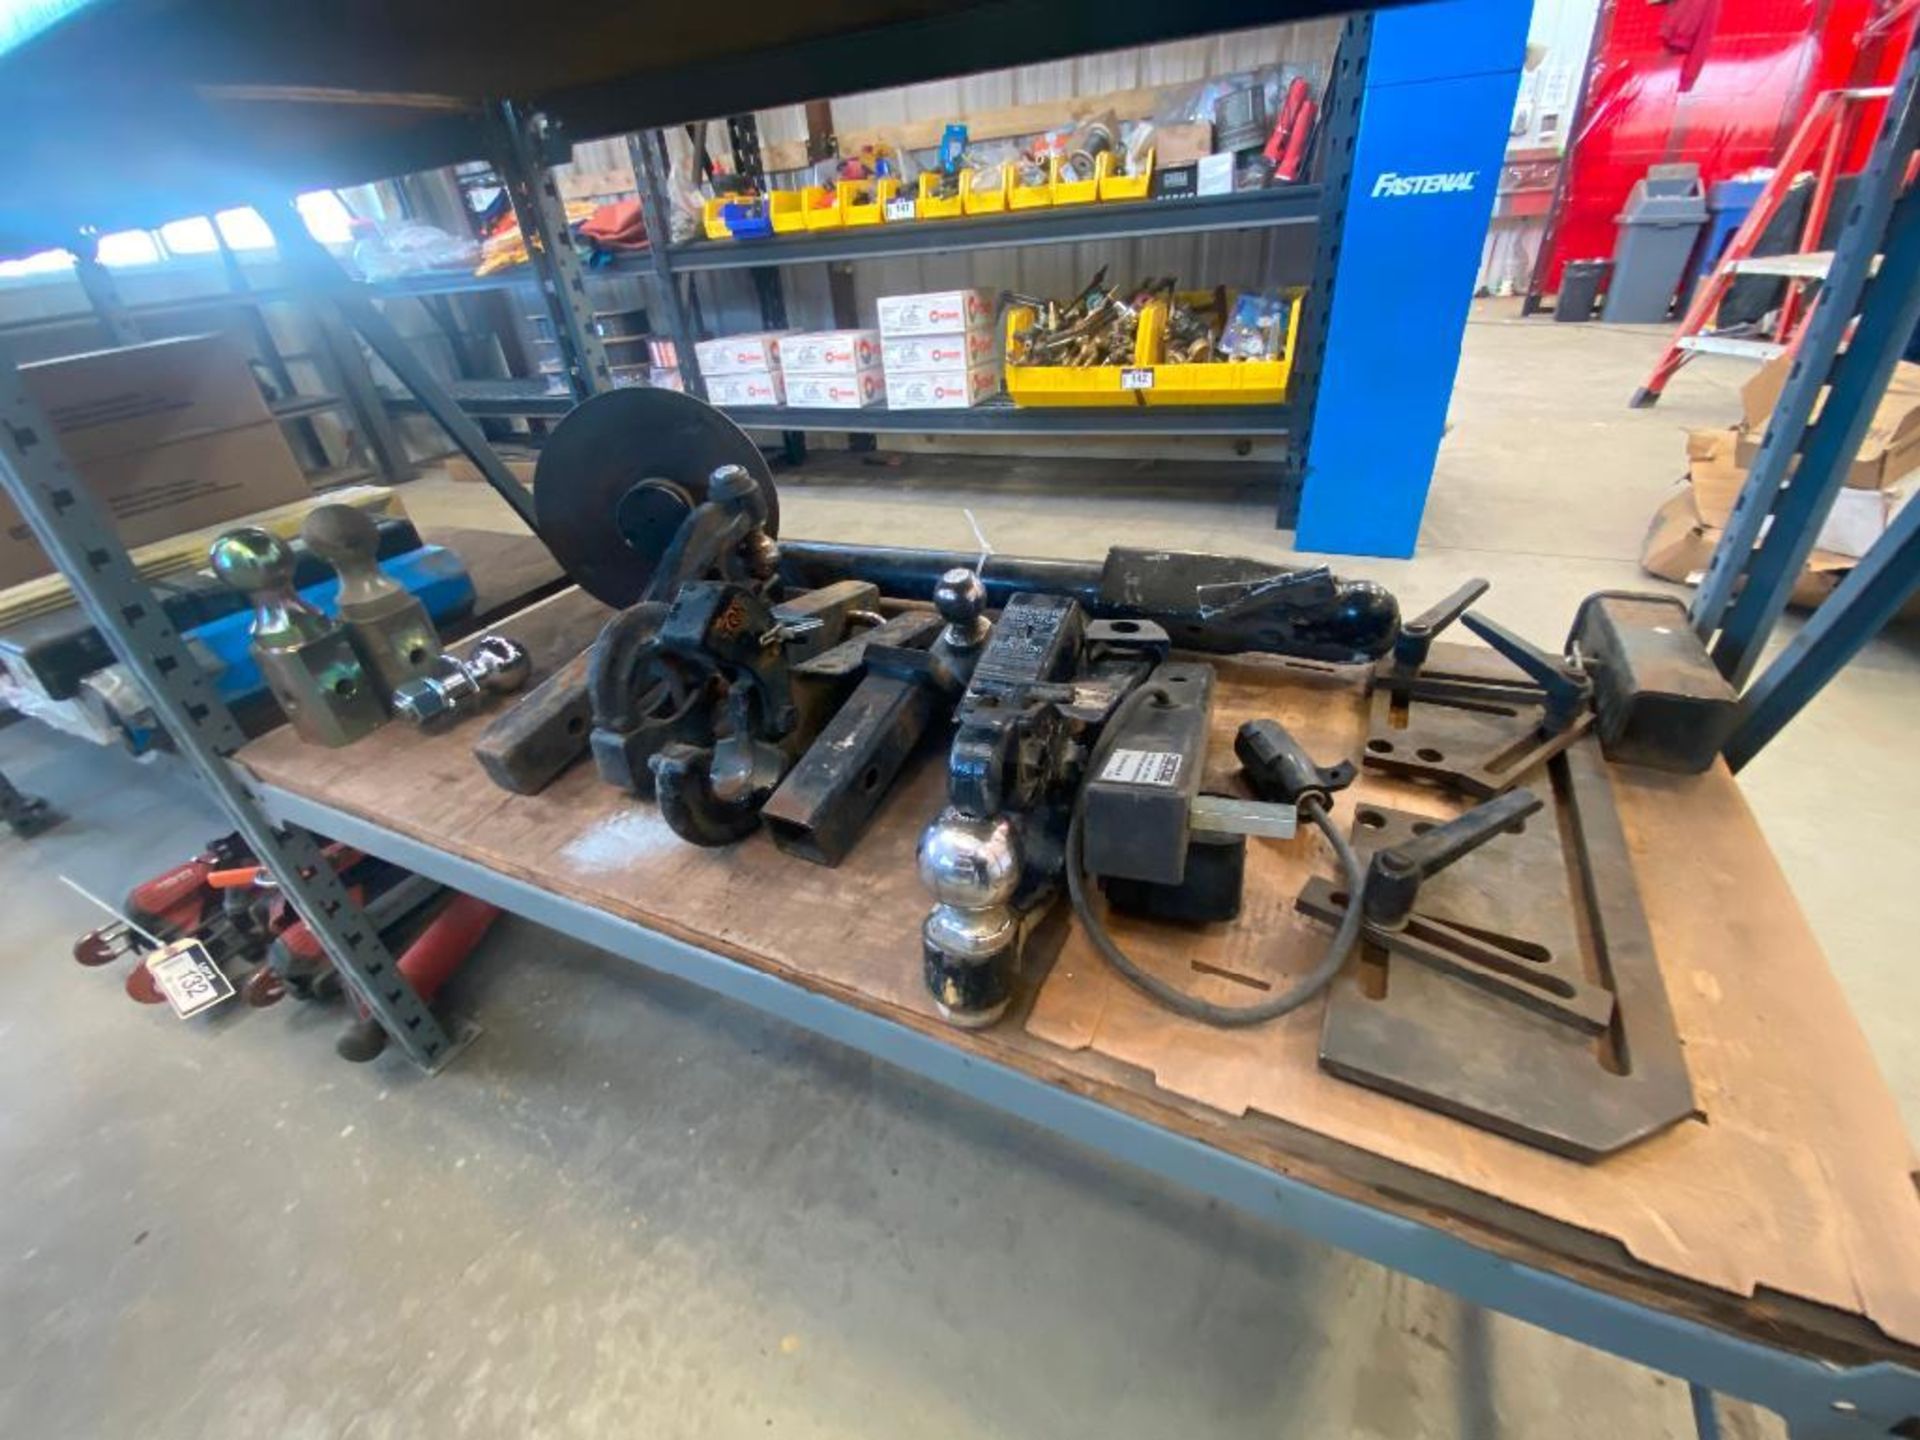 Lot of Asst. Hitch Parts Including Ball Hitches, Receivers, Pintle Hitches, etc. - Image 2 of 5